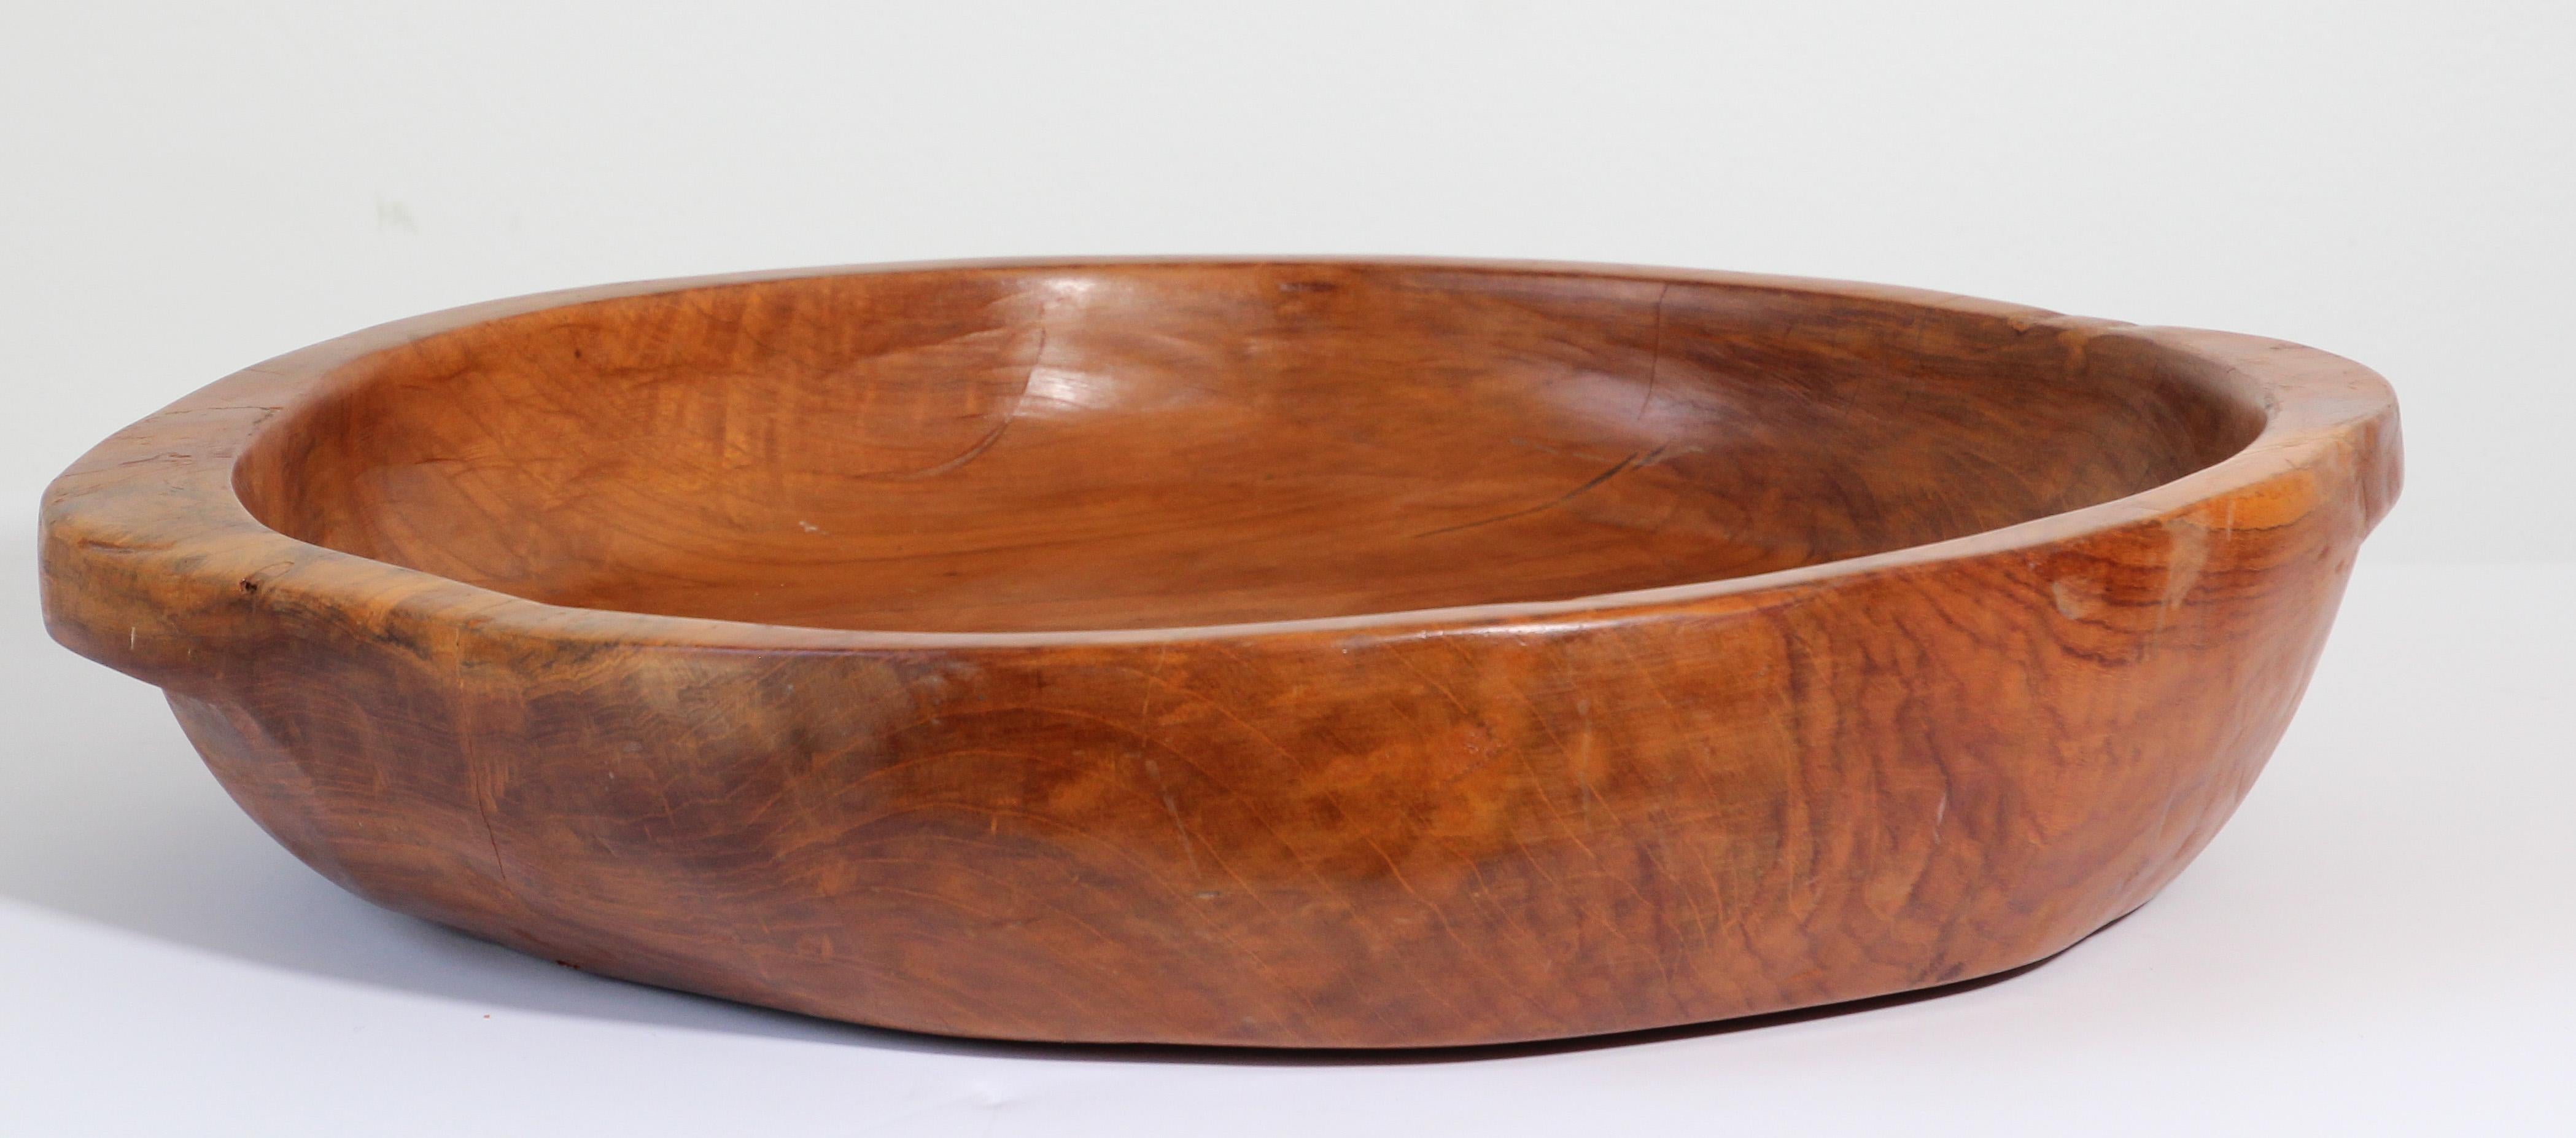 Large vintage teak burl wood bowl hand hewn, mid-20th century.
Unique organic sizable folk craft bowl round shape with handles.
This beautifully organic bowl is fashioned from a large burl wood. . 
Hewn from a single exceptional piece of old